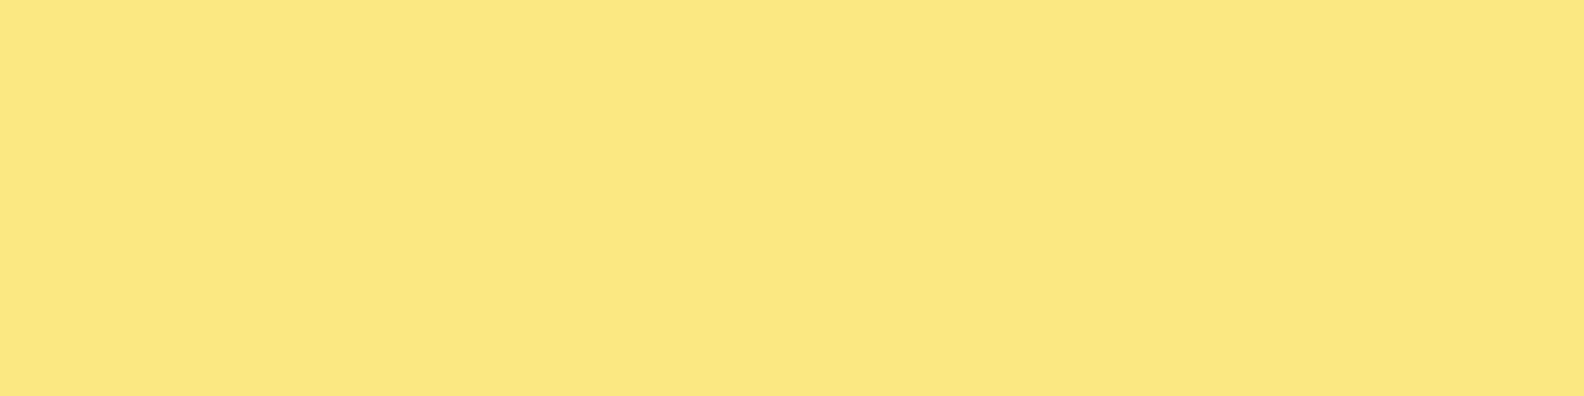 1584x396 Yellow Crayola Solid Color Background